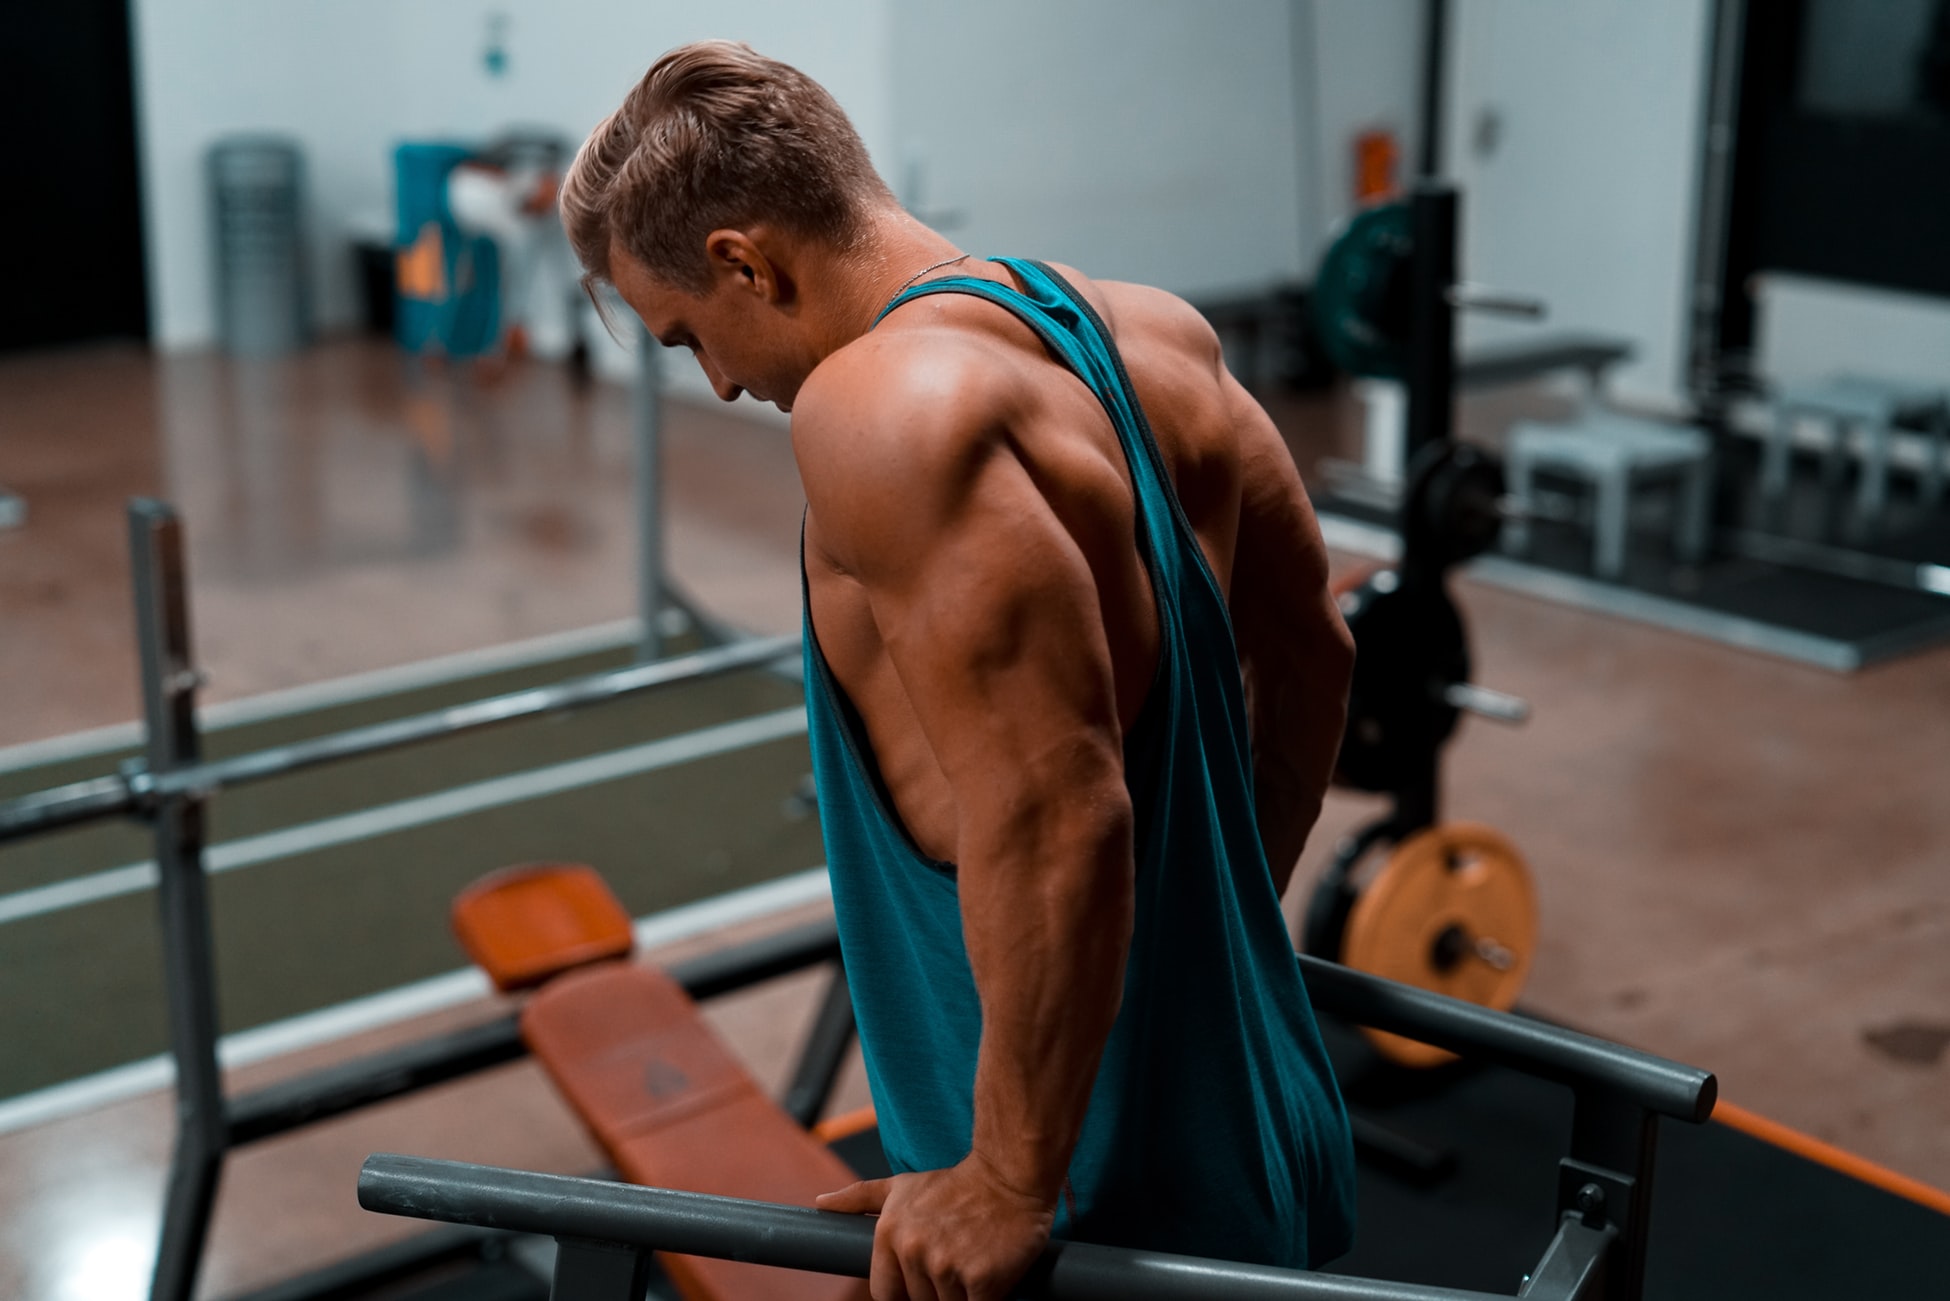 Pump the size of your biceps with these two most effective exercises